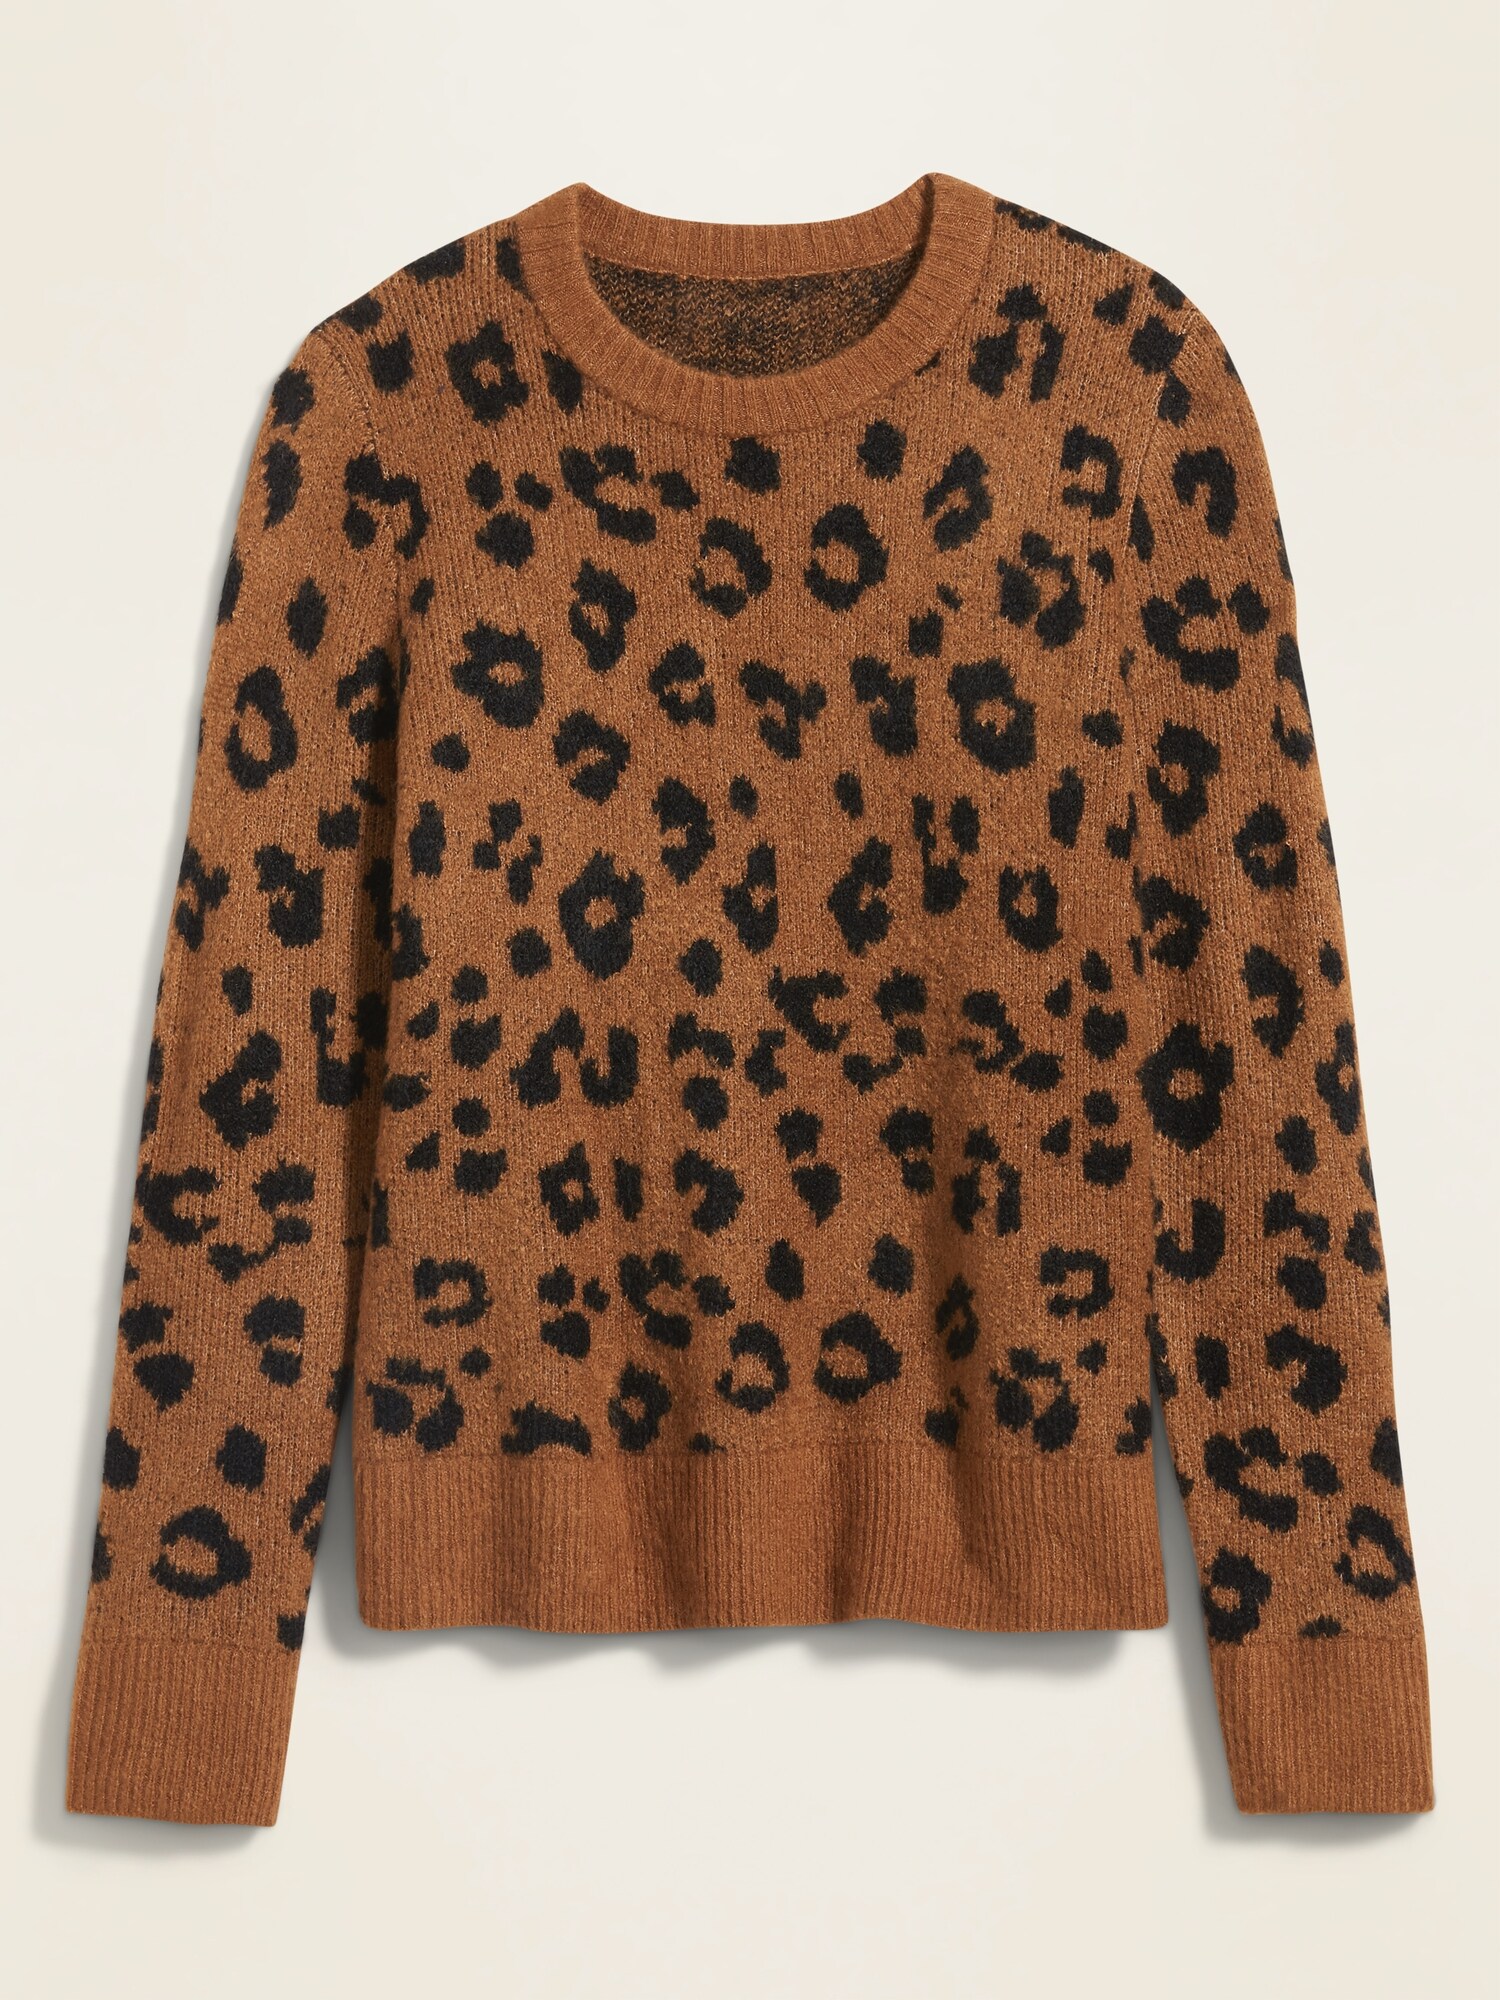 Knox Rose Leopard Print Sweater Women's 2x Crew Neck Stretch Knit Pullover  New With Tags for Sale in Hiram, GA - OfferUp